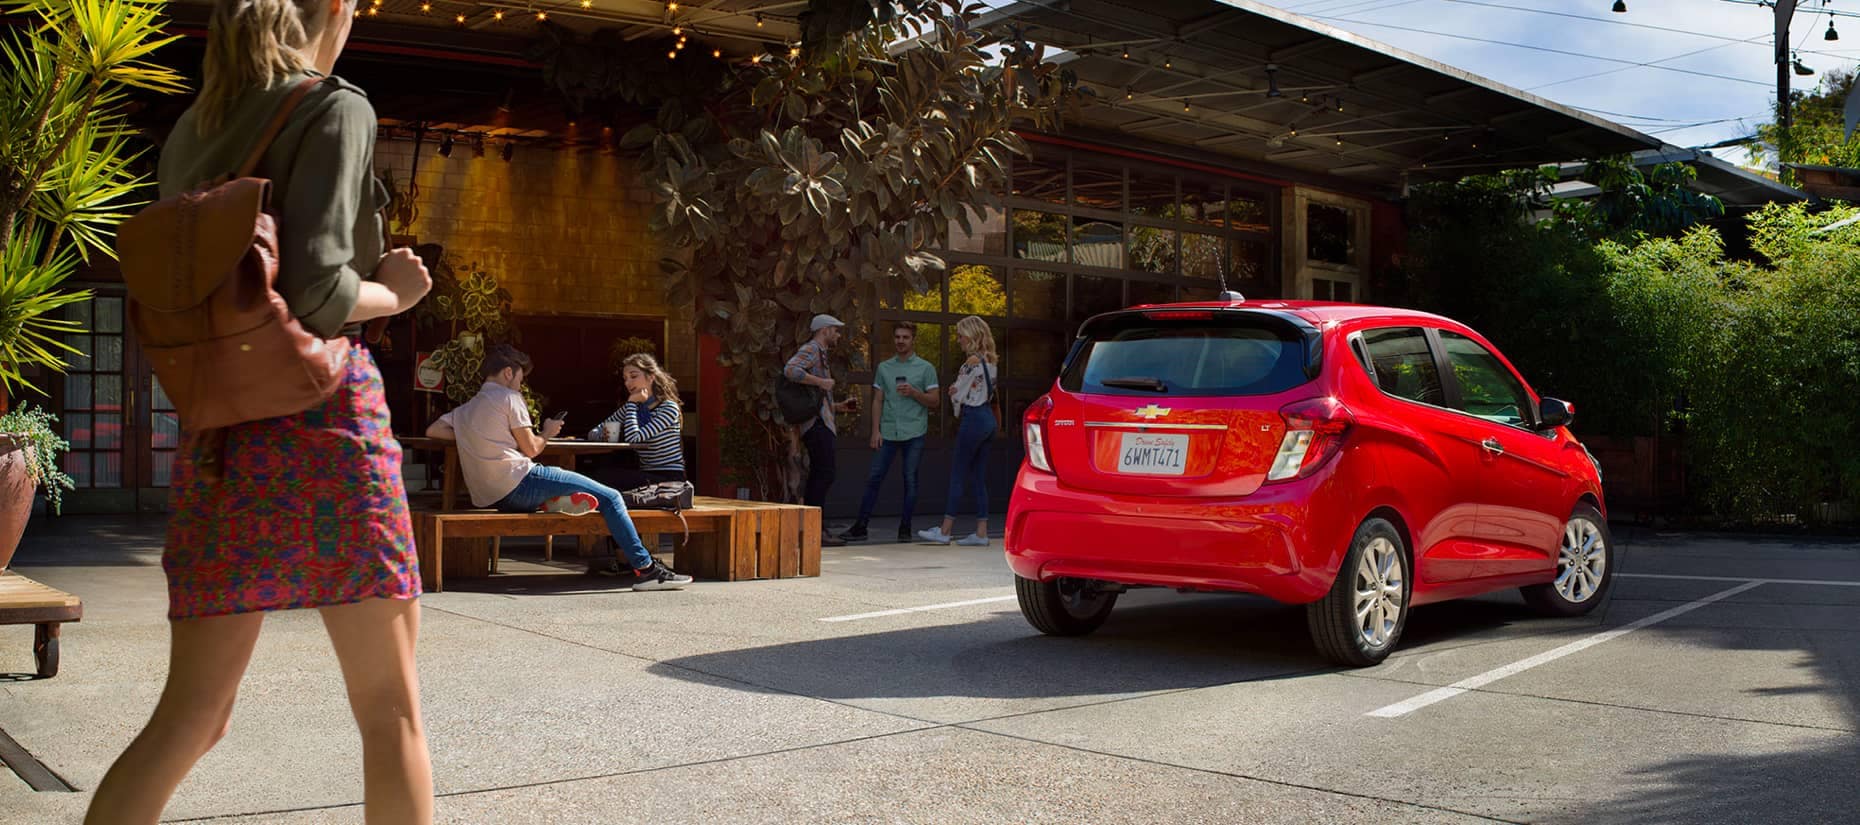 Woman walks past a red Chevy spark parked at a restuarant.